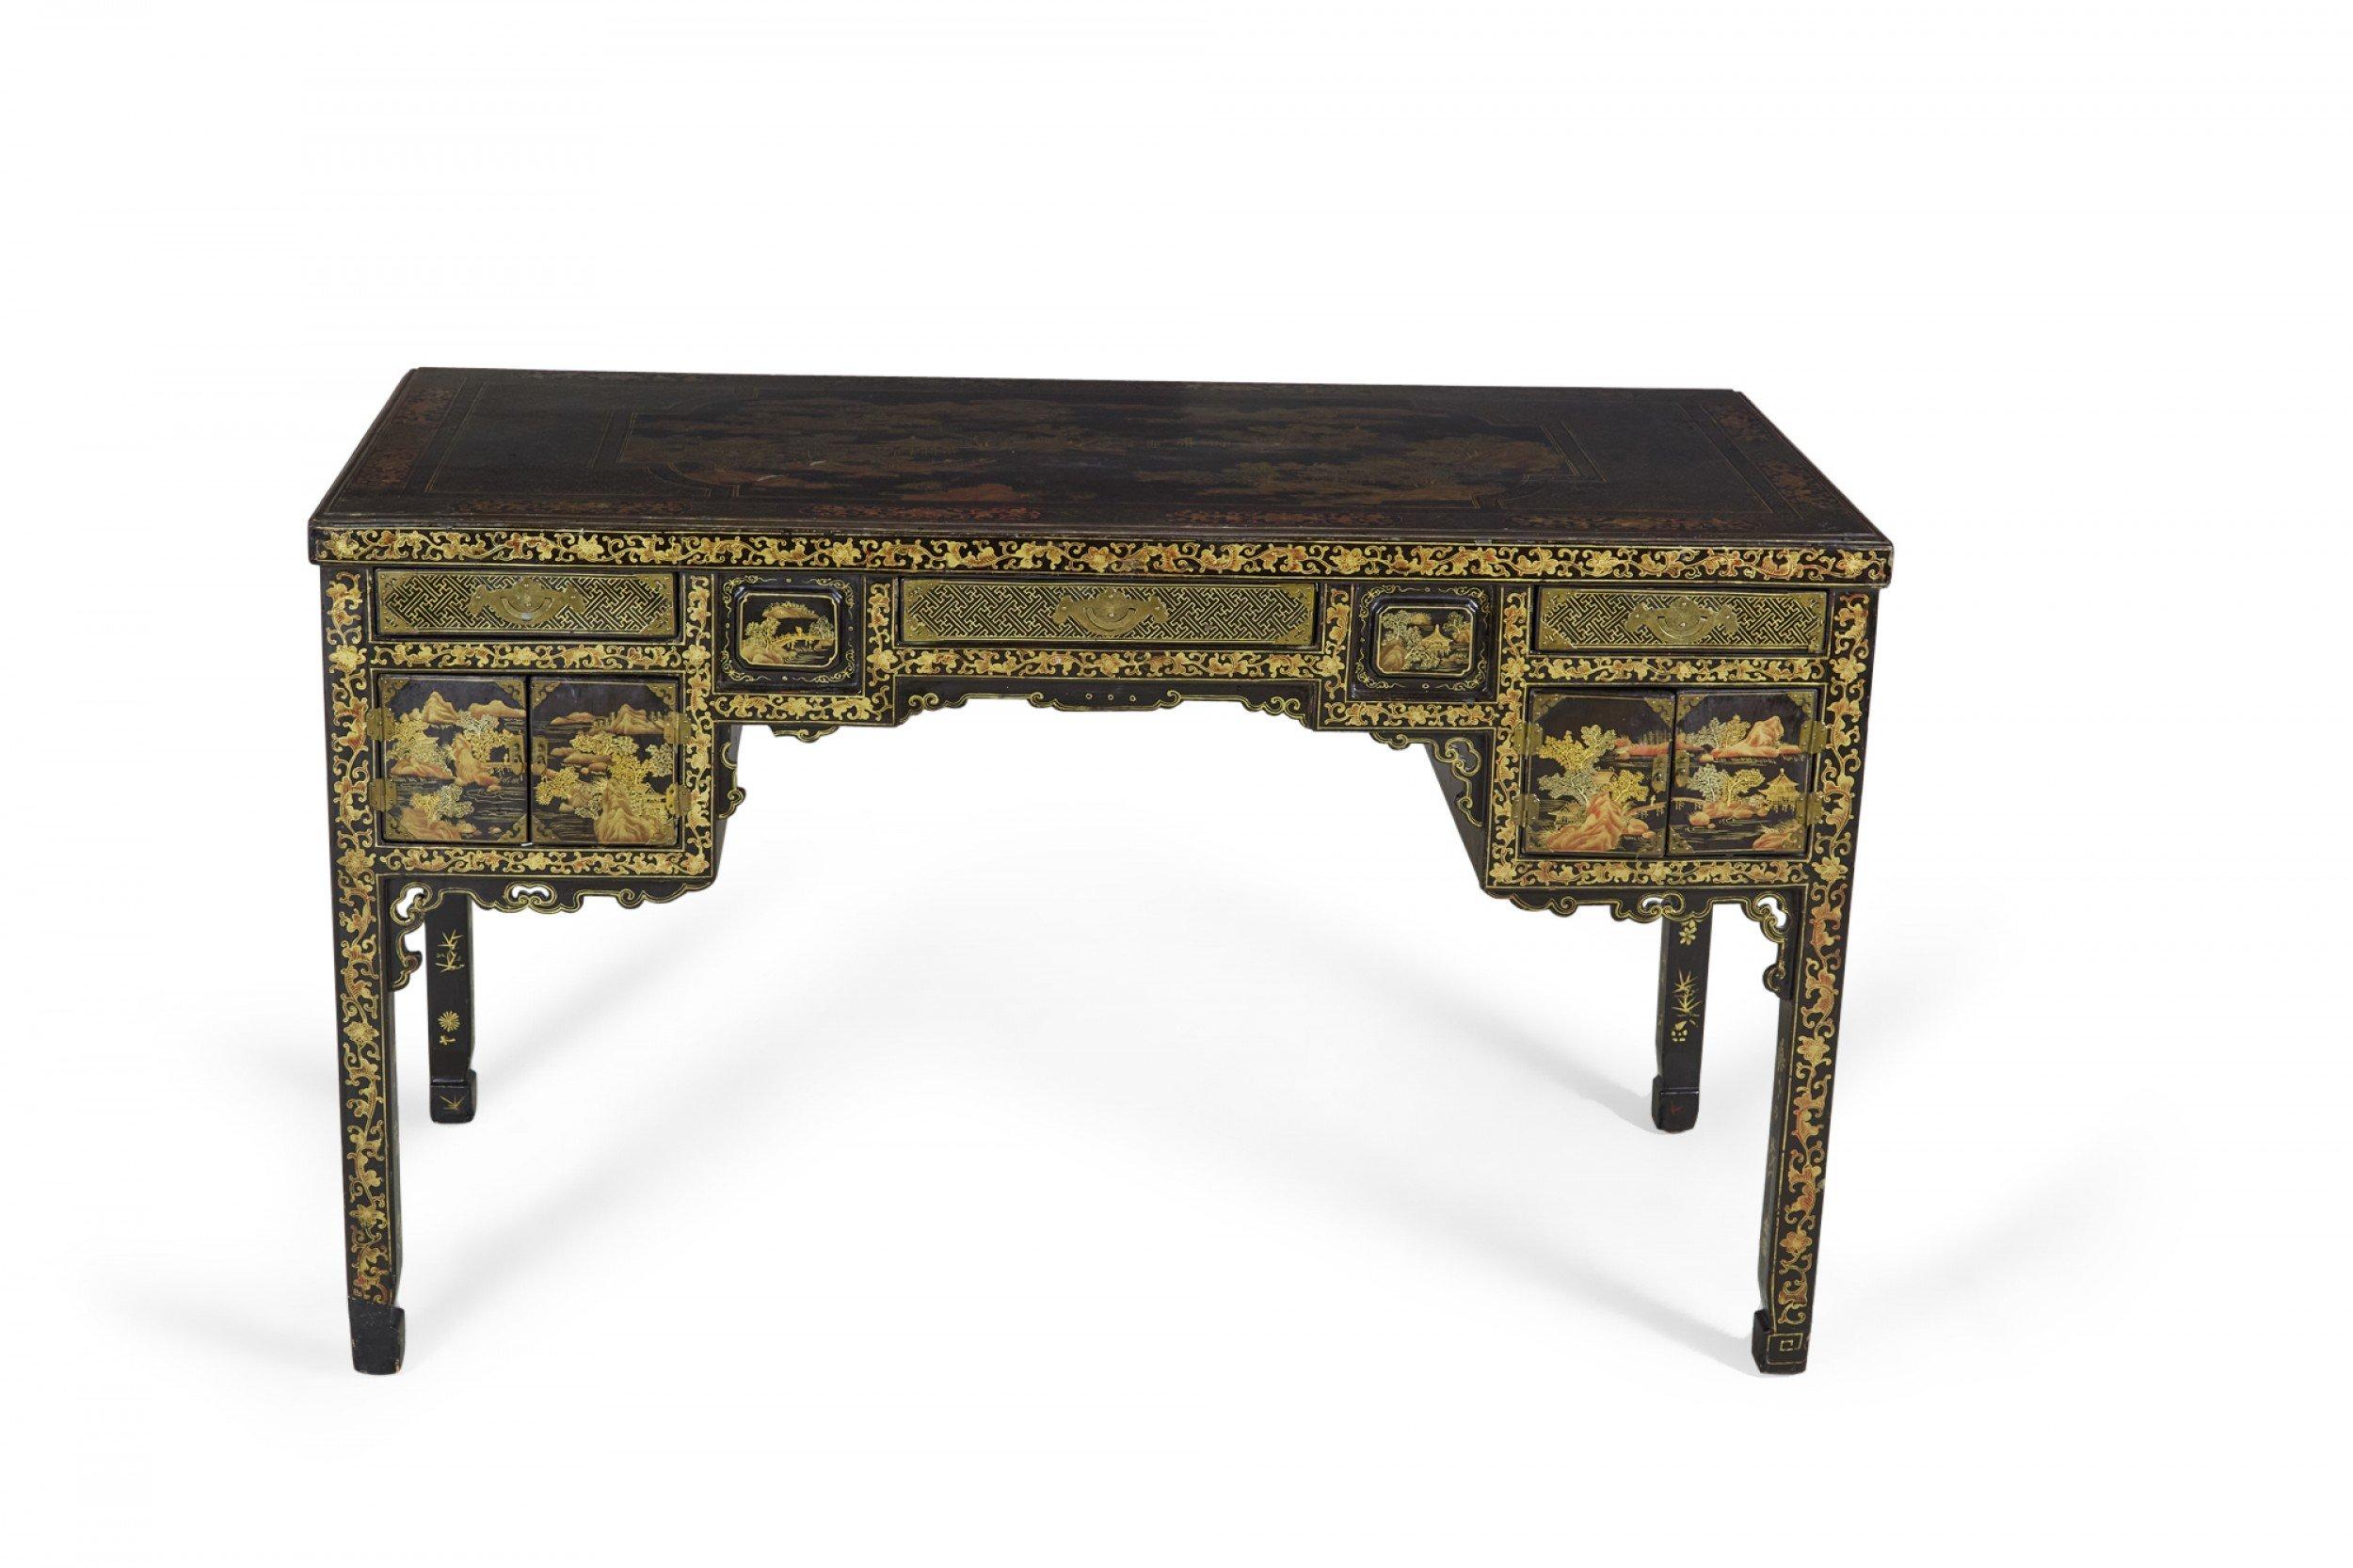 English Regency Chinese export (19th Century) black lacquer desk with foliate trim and Chinese landscape imagery in gilt throughout with 3 frieze drawers over a kneehole flanking 2 double hinged doors all with bronze pulls.
  